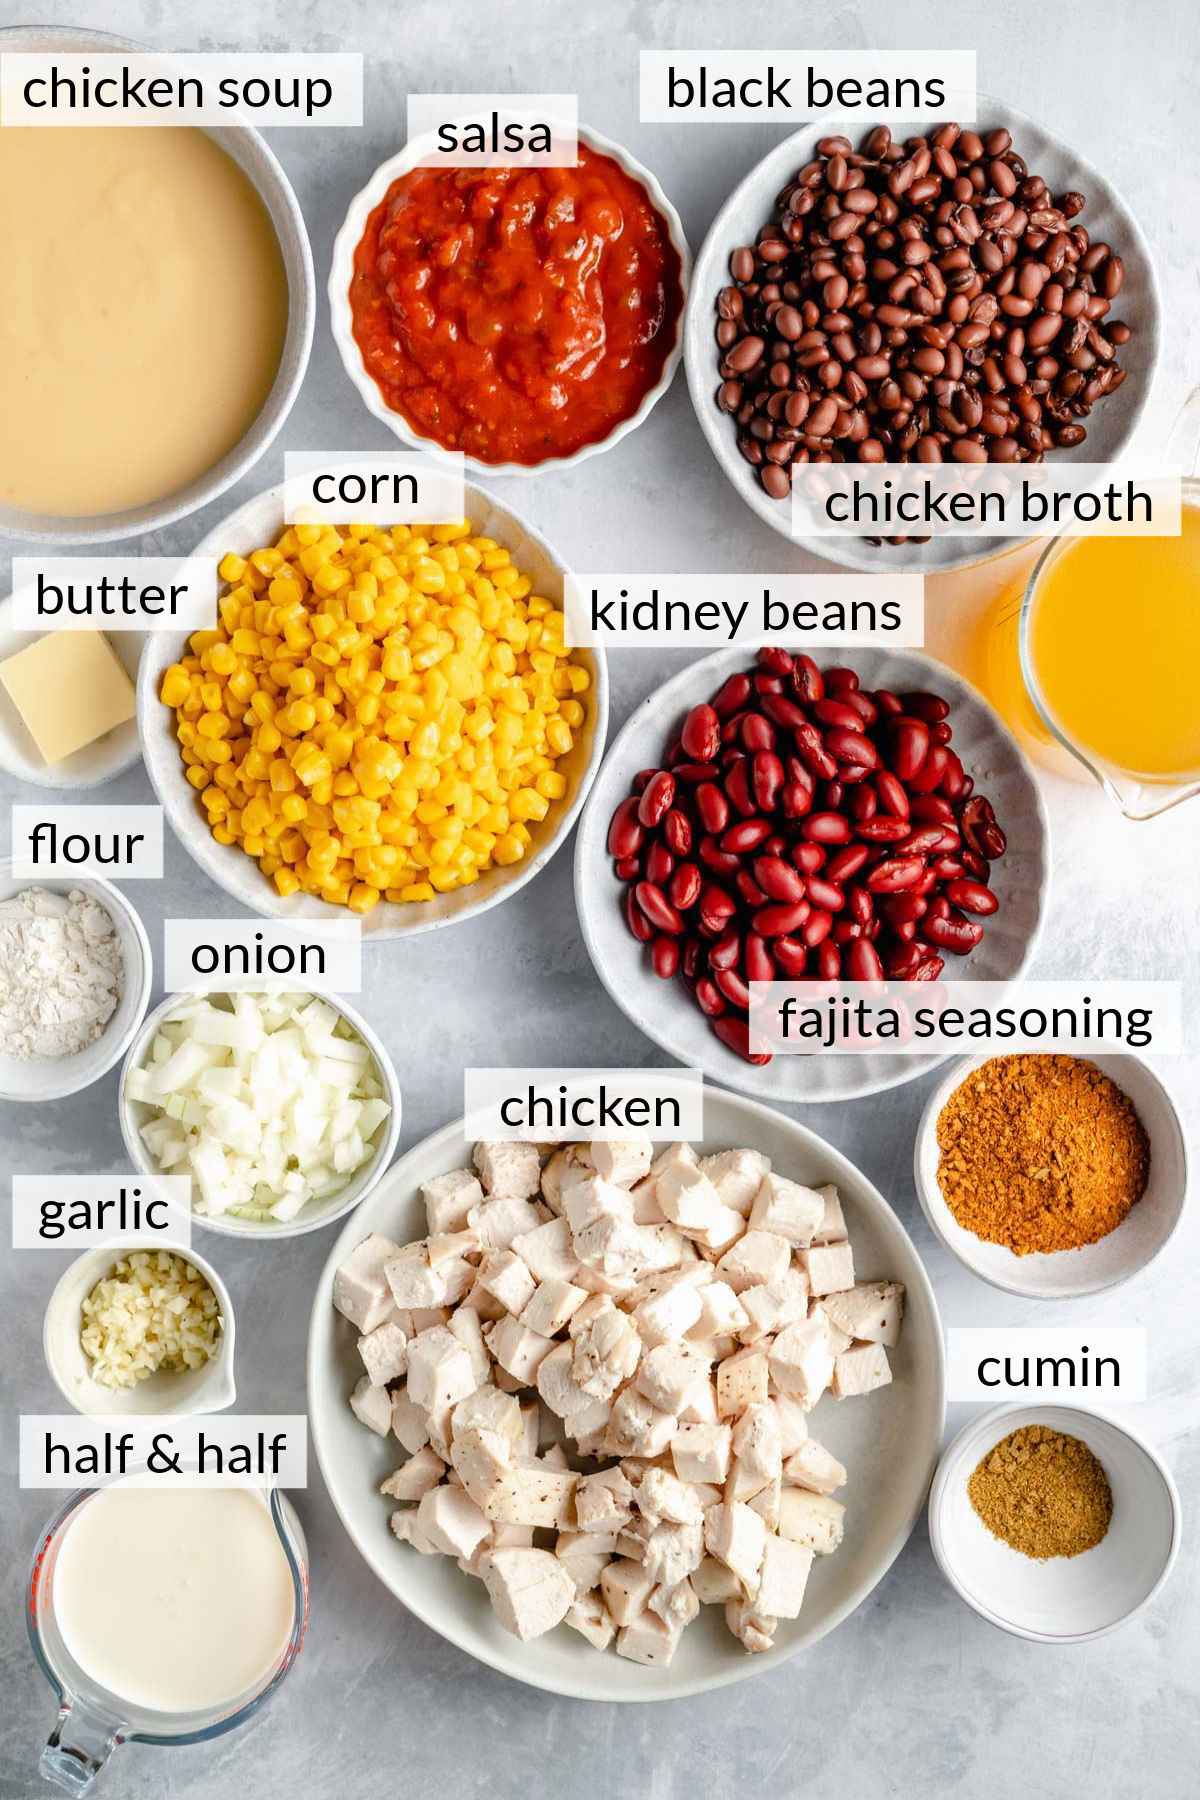 Chicken, beans, corn, seasonings, broth and cream divided into bowls.